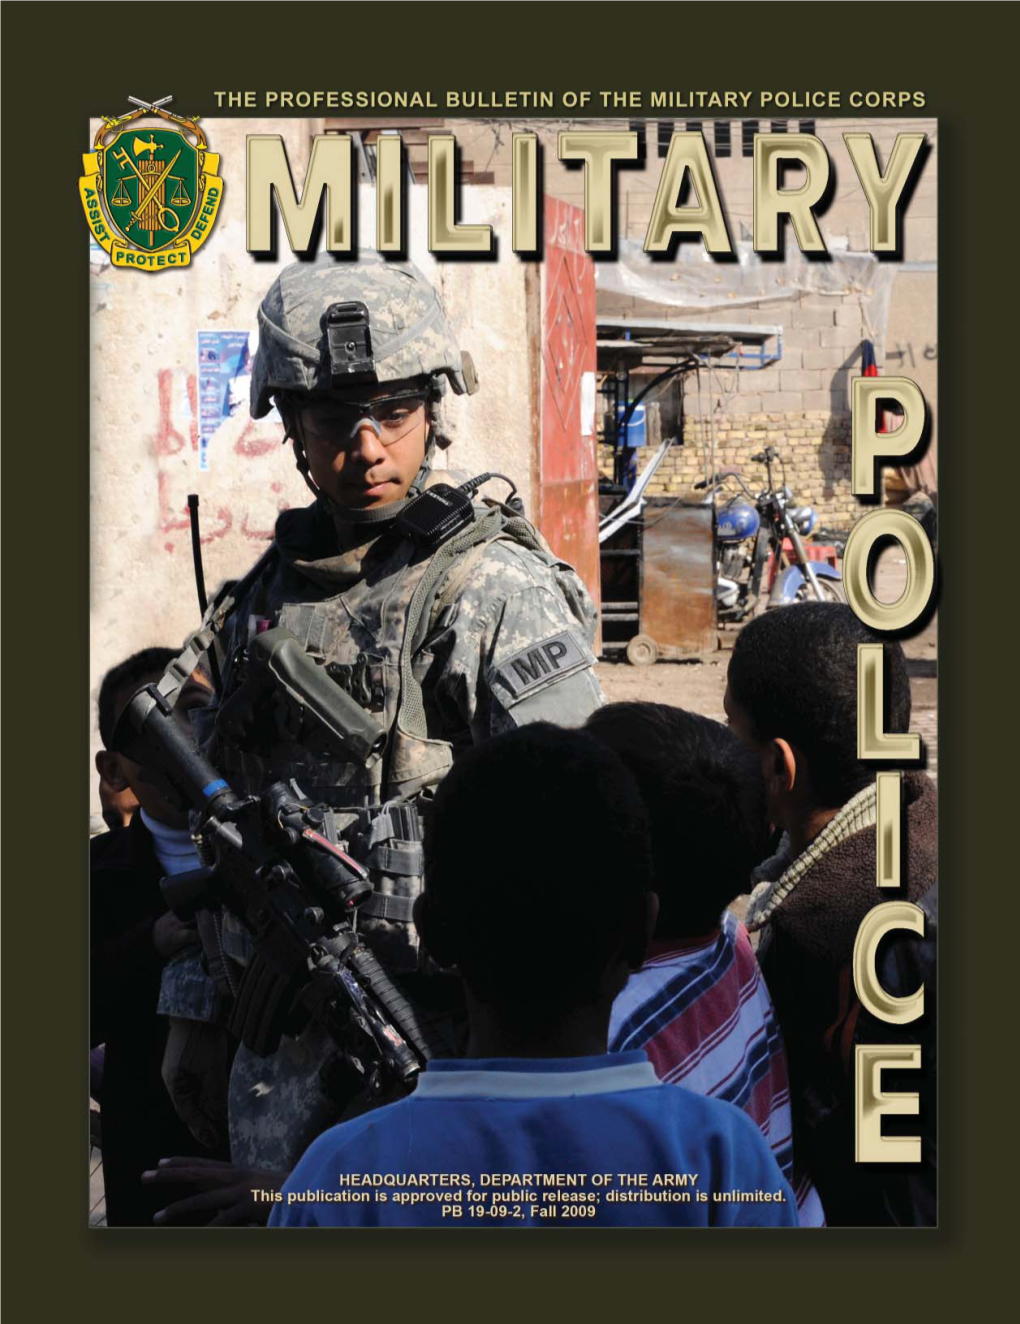 Military Police, an Ofﬁ Cial U.S